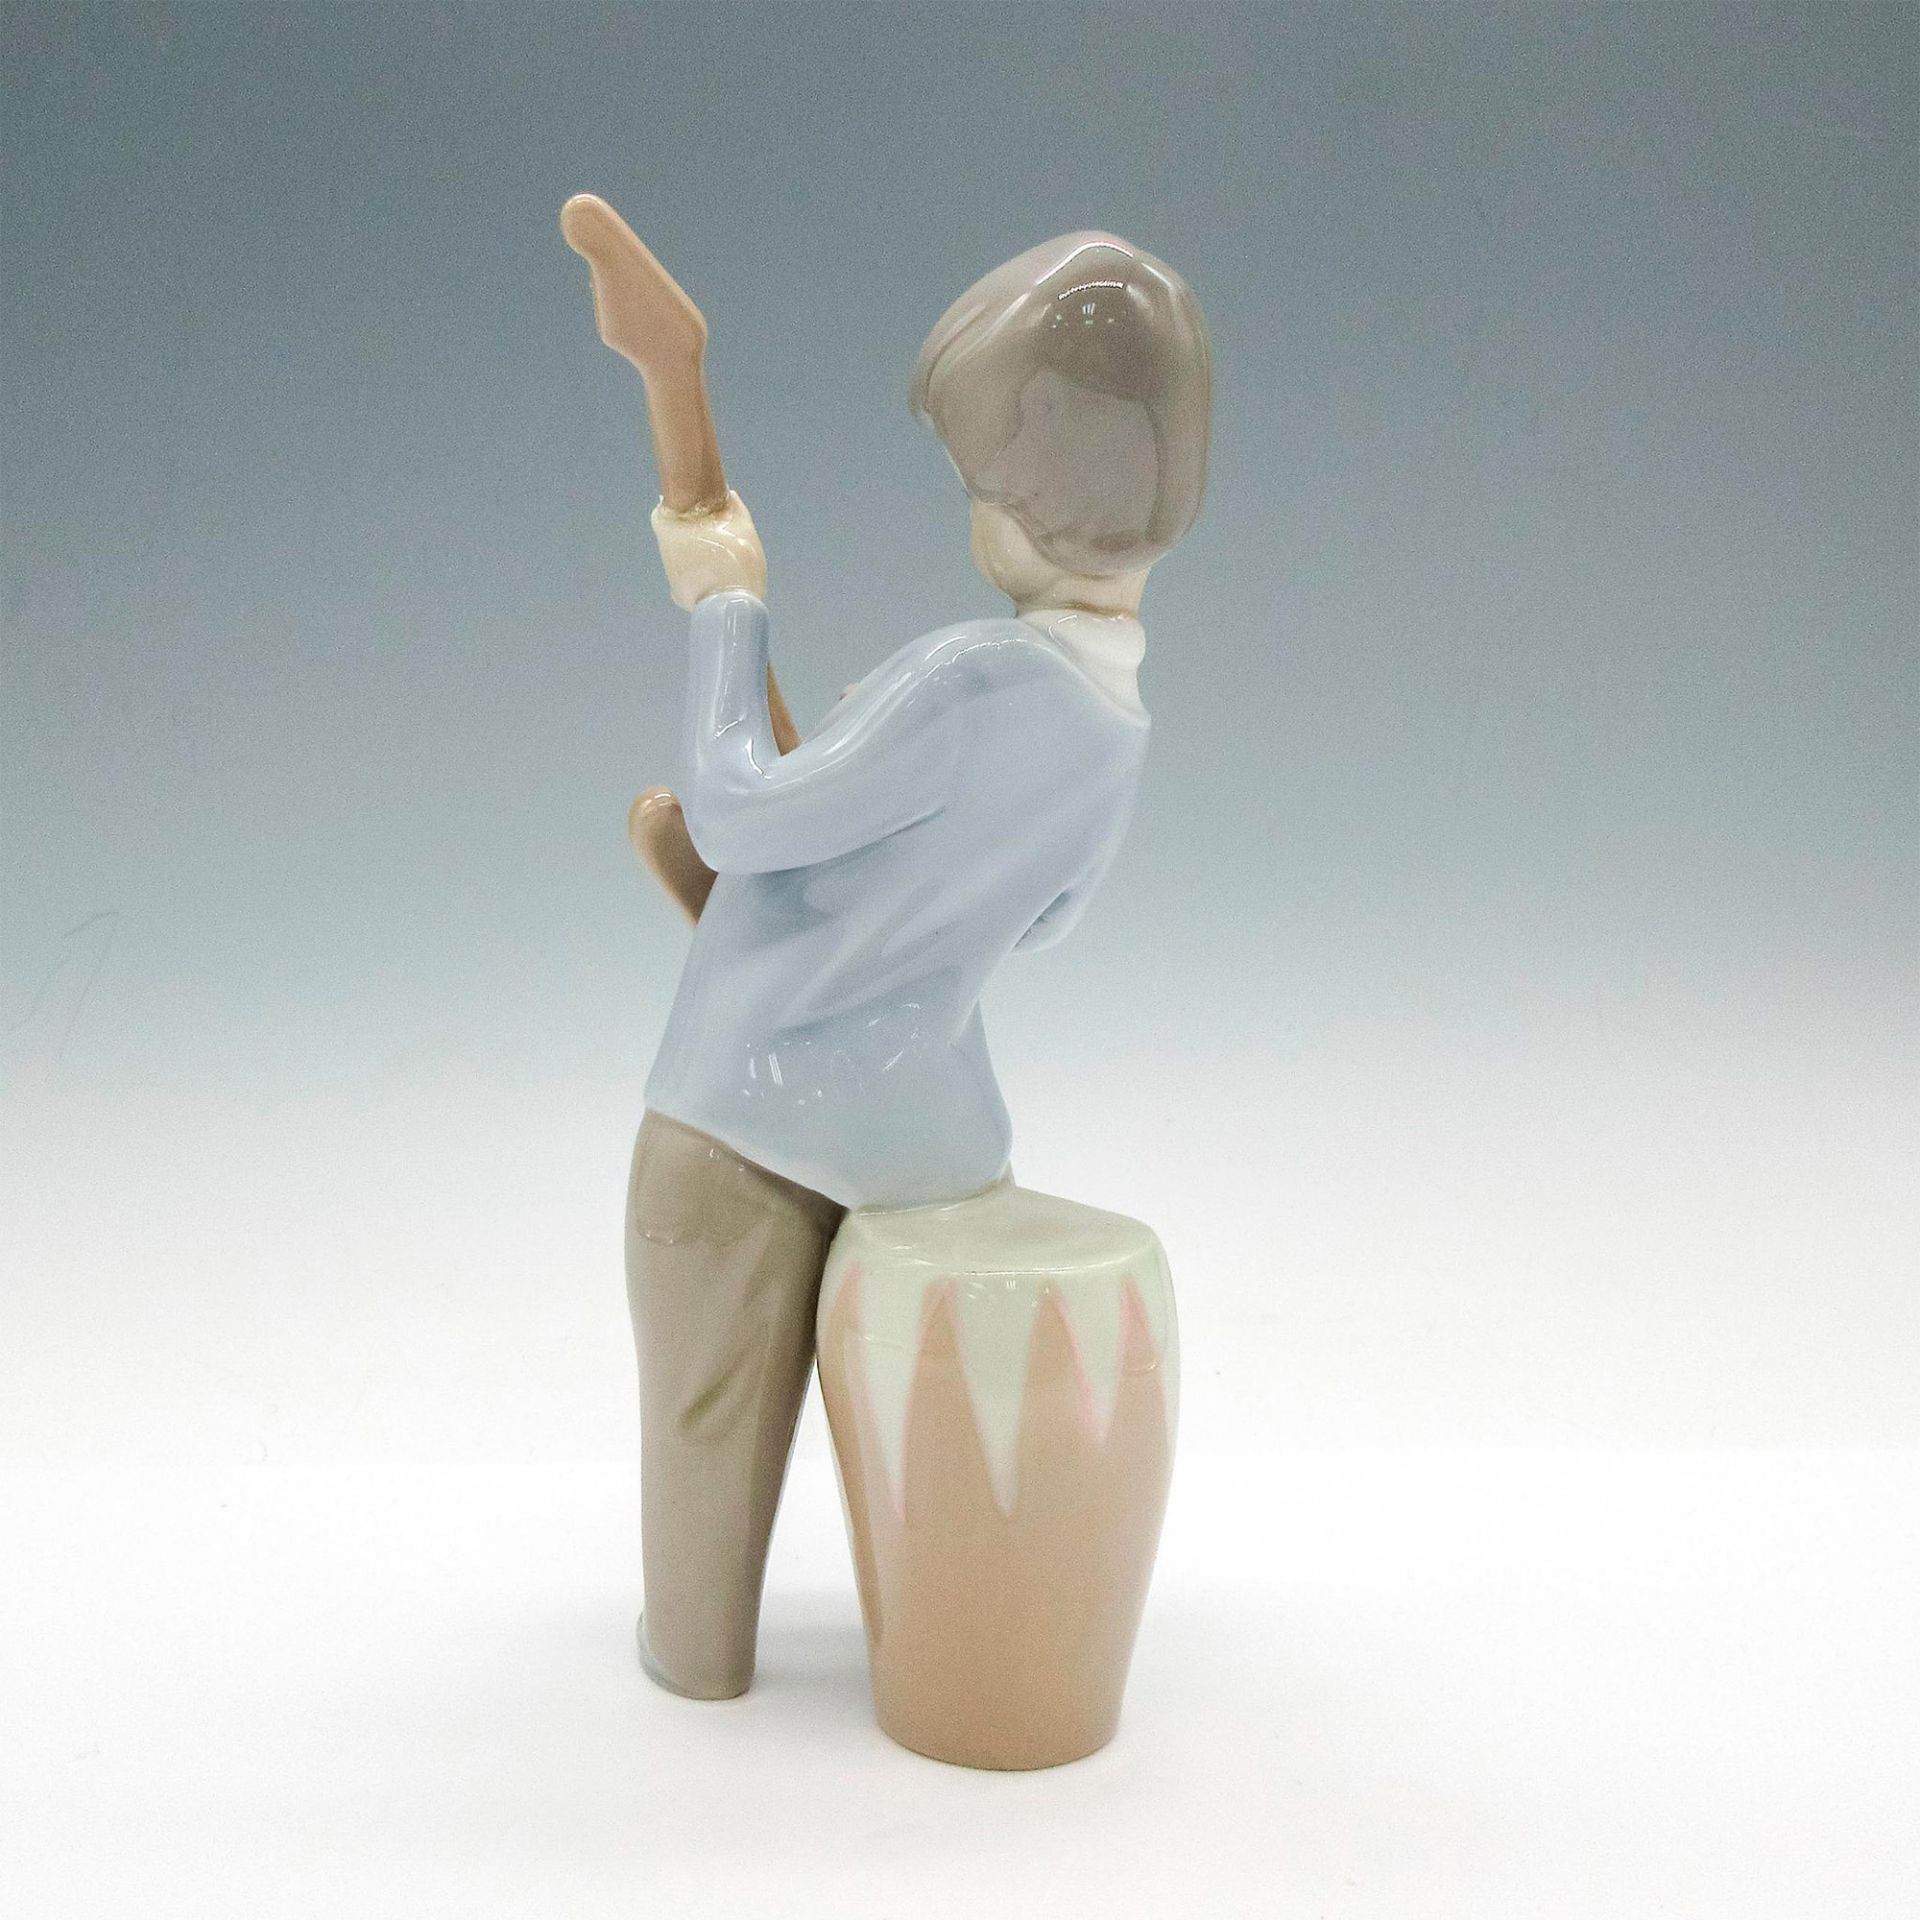 Boy With Guitar 1004614 - Lladro Porcelain Figurine - Image 2 of 3